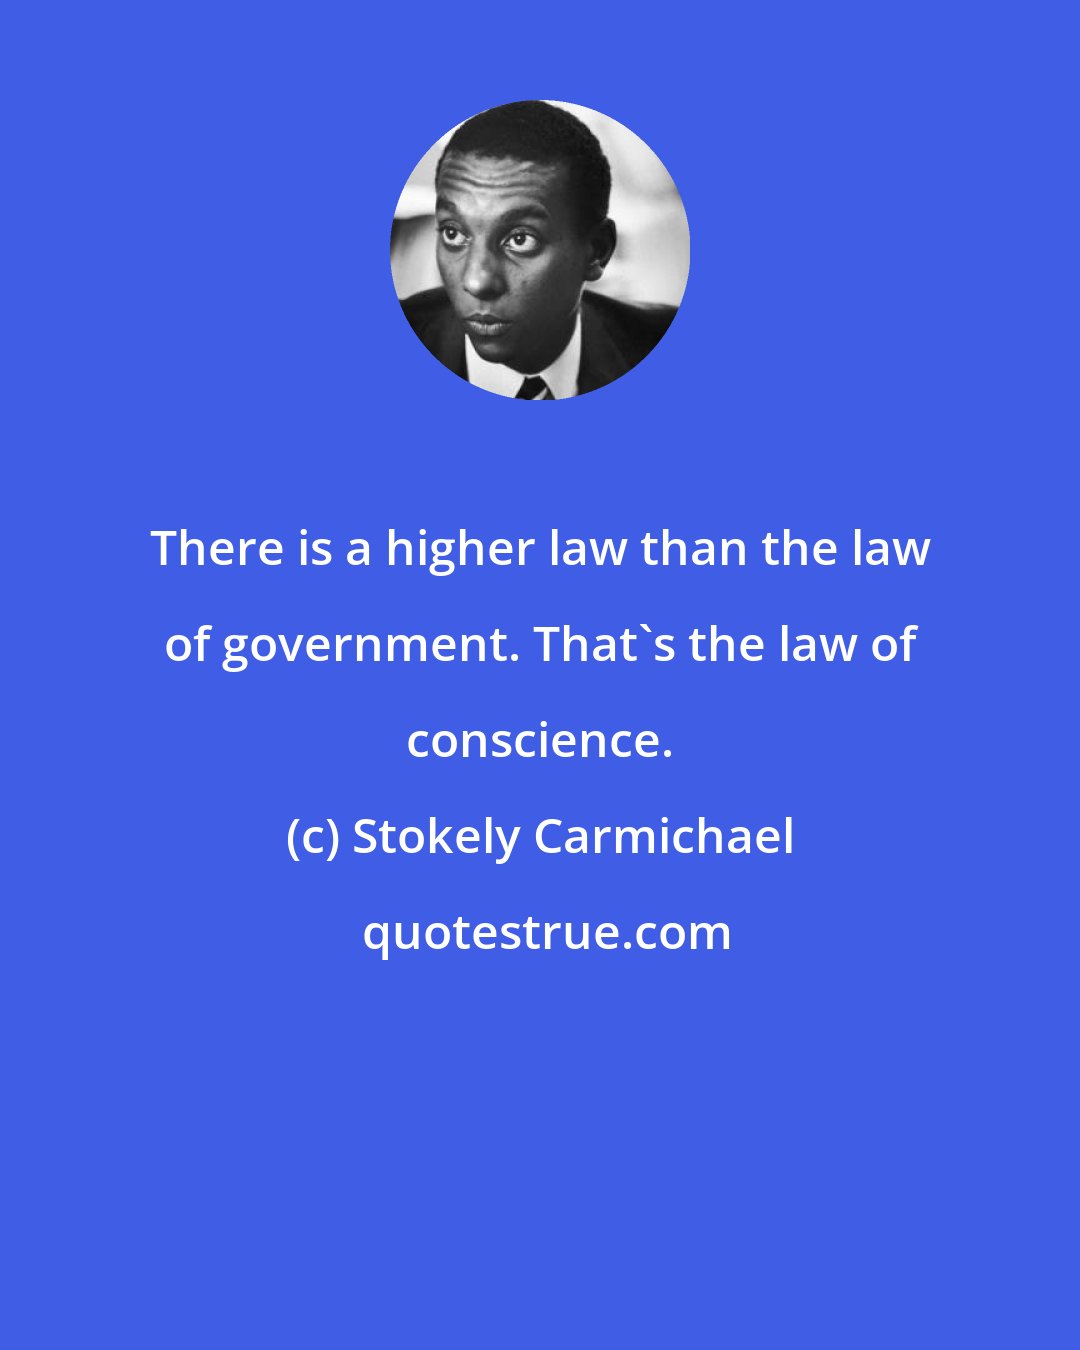 Stokely Carmichael: There is a higher law than the law of government. That's the law of conscience.